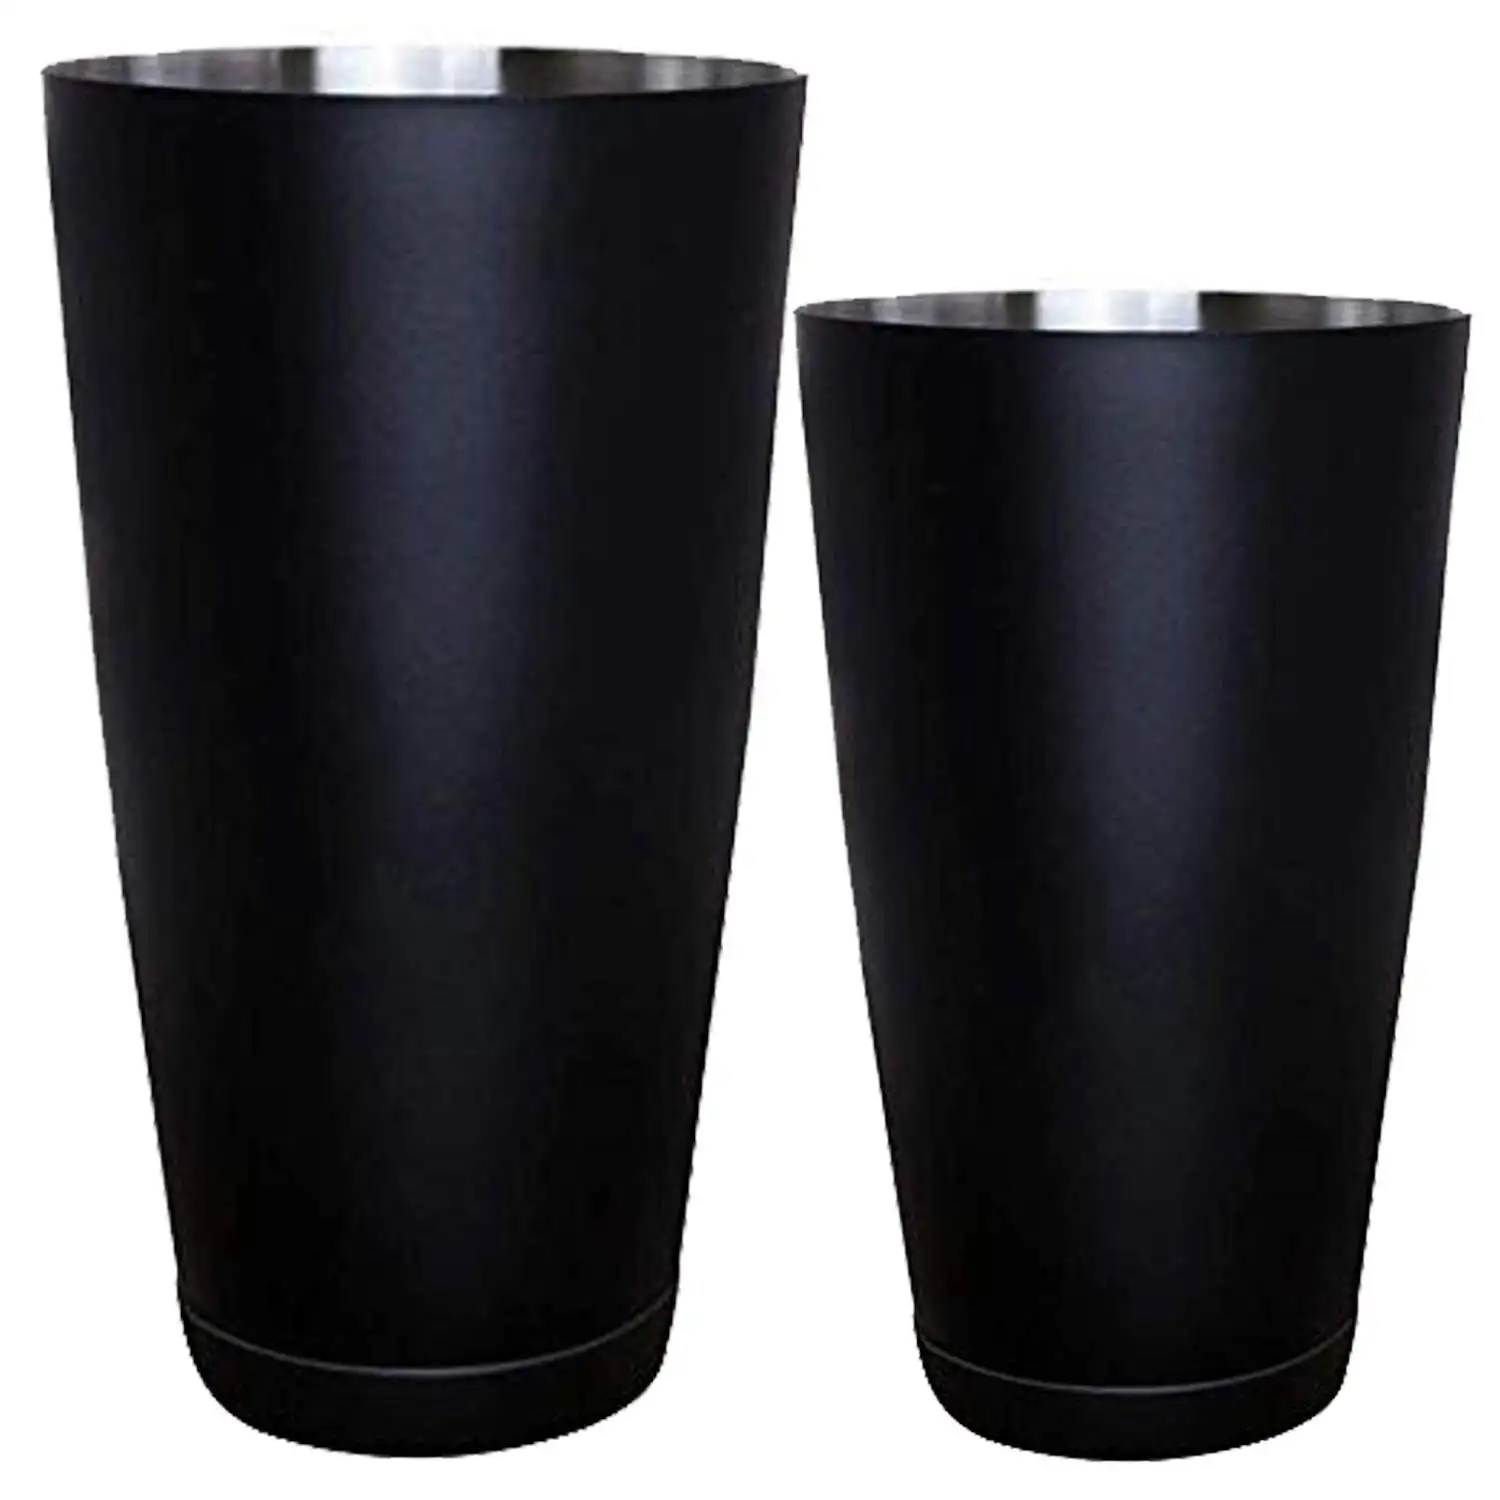 Luxurious Stainless Steel Black Boston Cocktail Shaker Set - Enhance Your Bartending Experience with Premium Tools